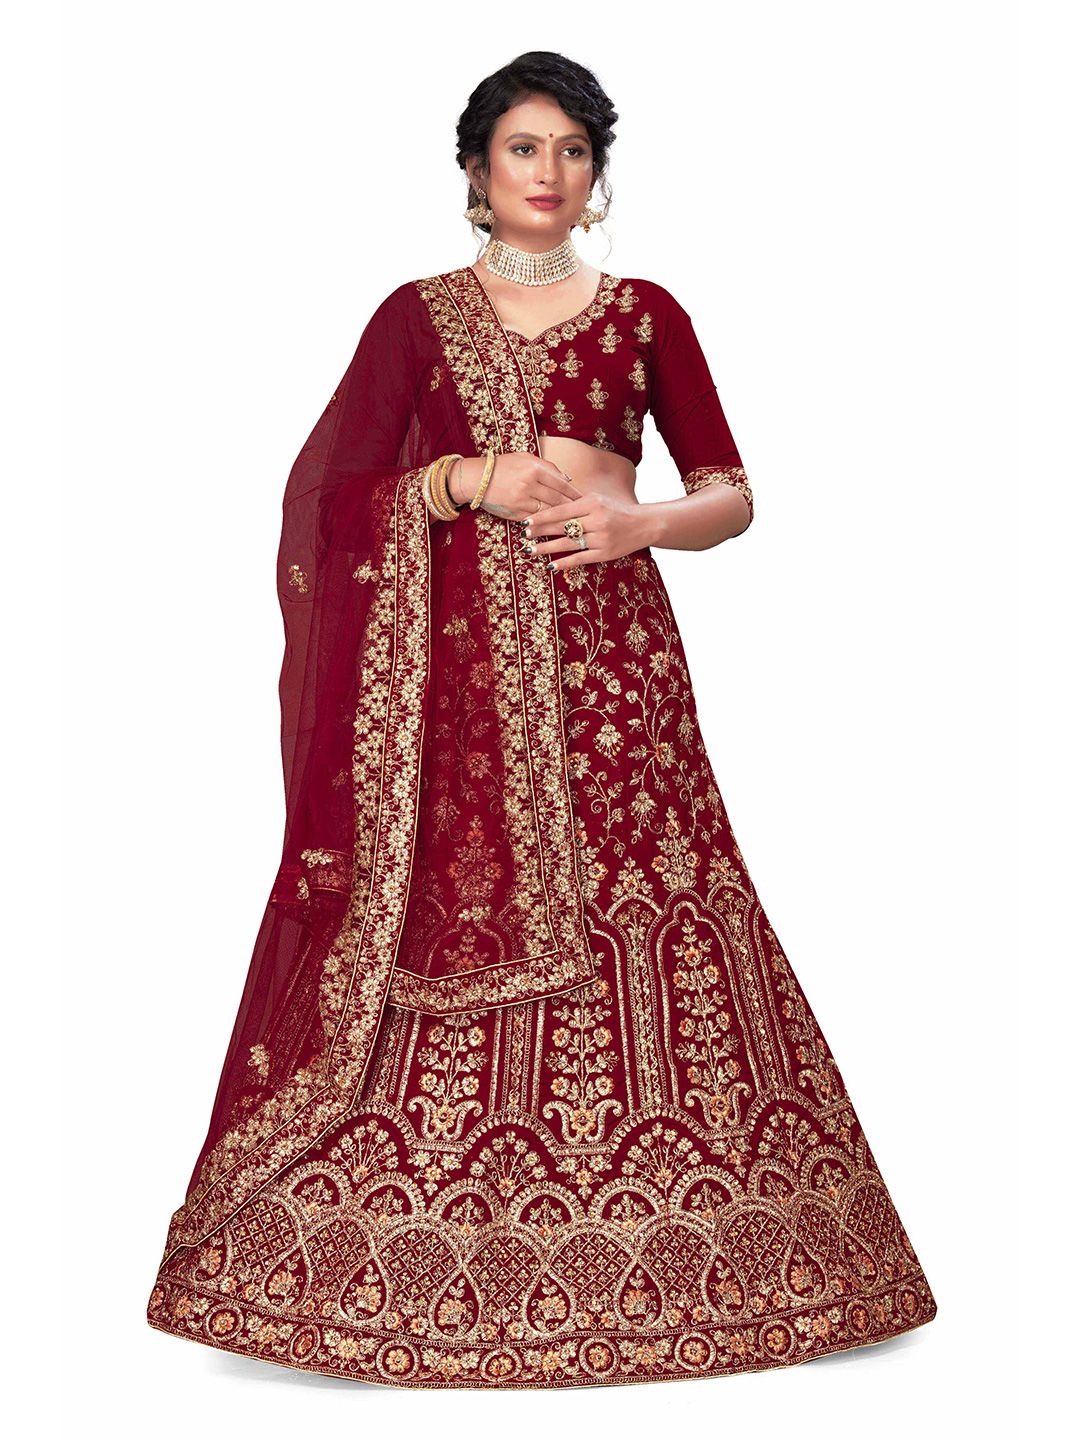 MANVAA Embroidered Beads and Stones Semi-Stitched Lehenga & Unstitched Blouse With Dupatta Price in India